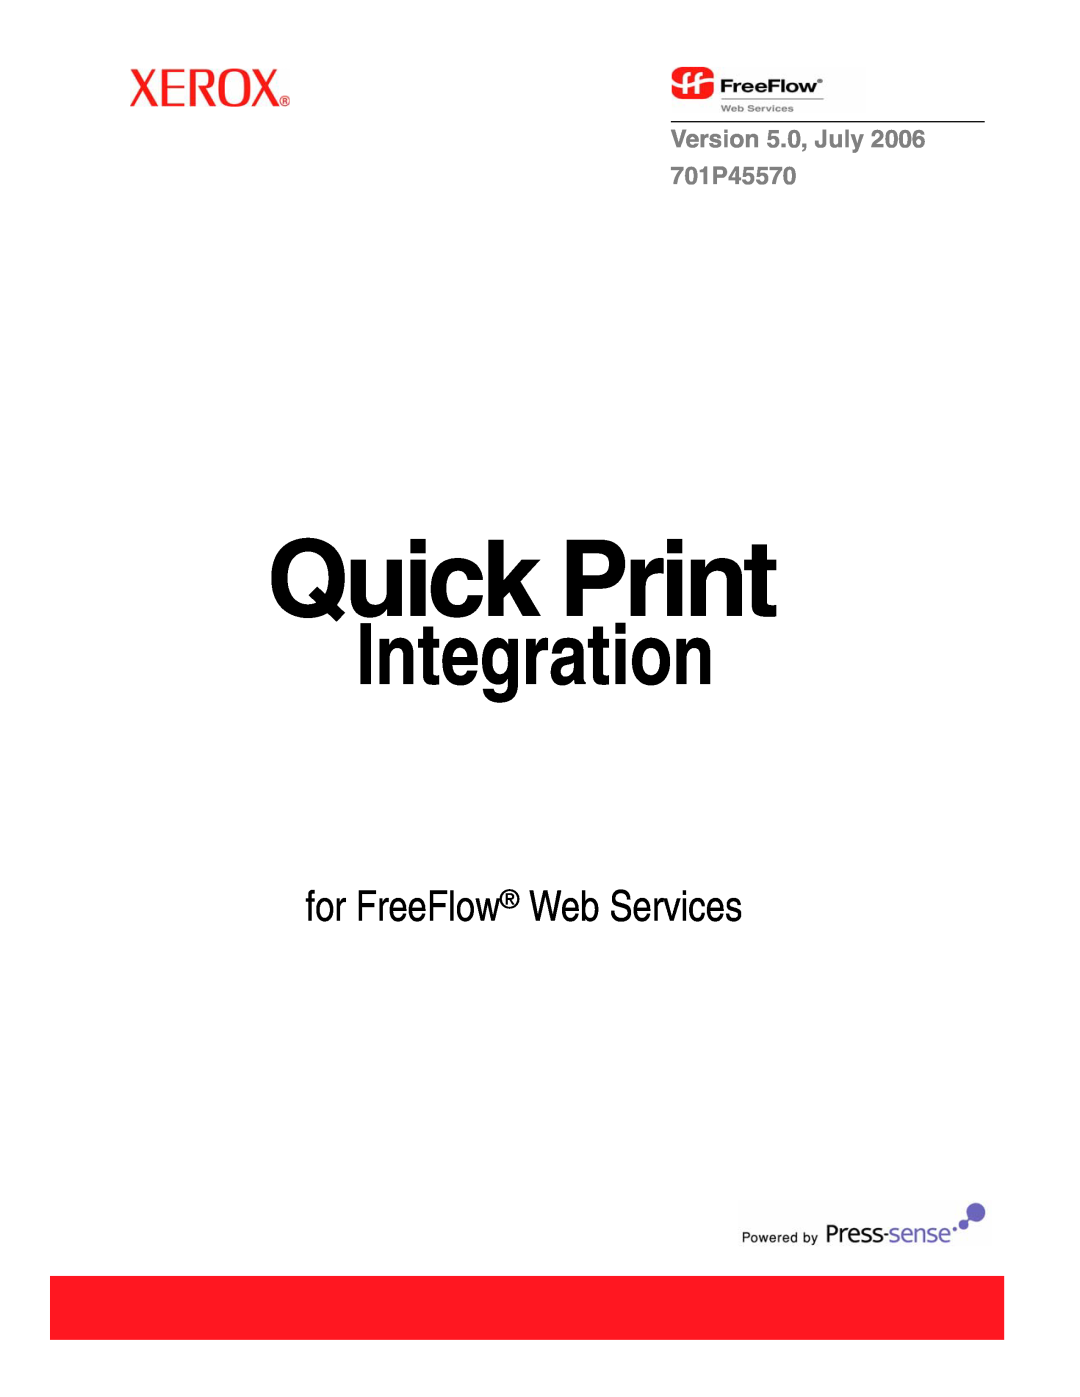 Xerox manual Quick Print, Integration, for FreeFlow Web Services, Version 5.0, July 701P45570 